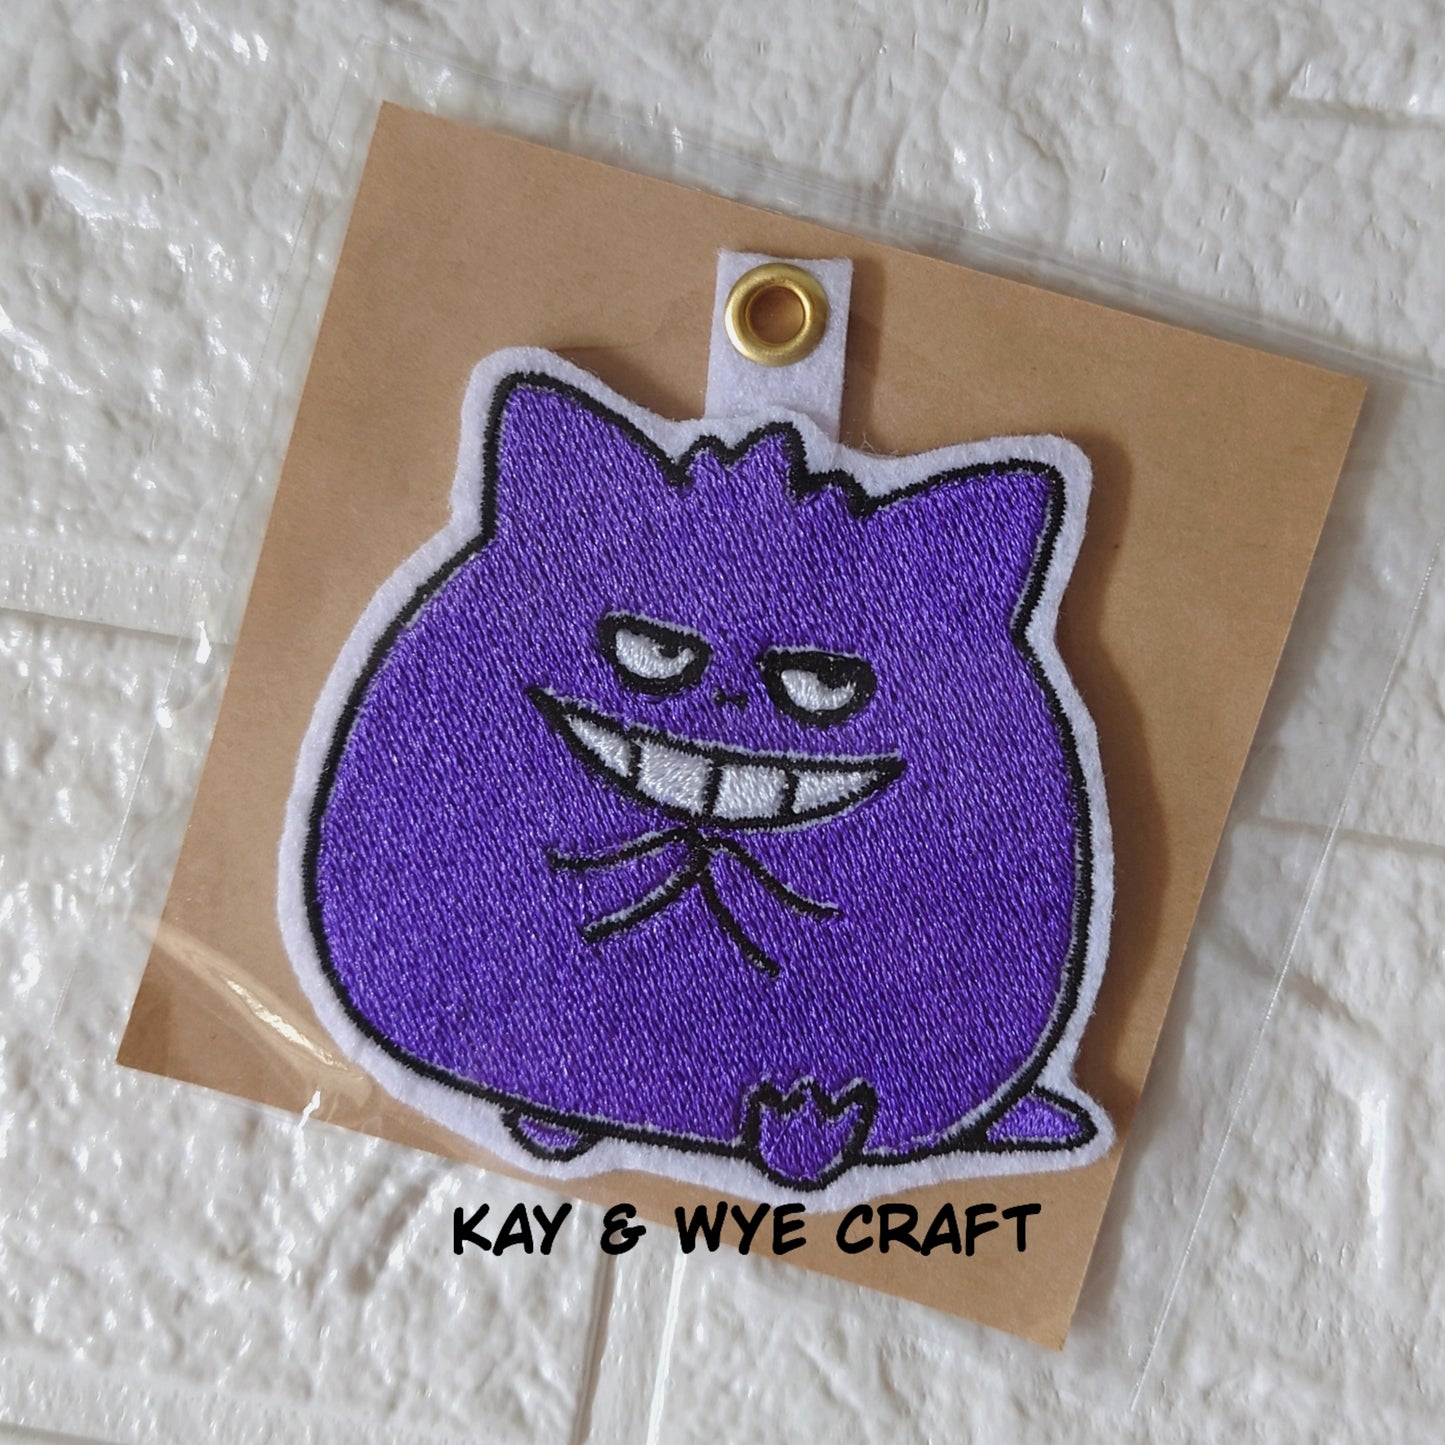 Homemade Embroidery Badge